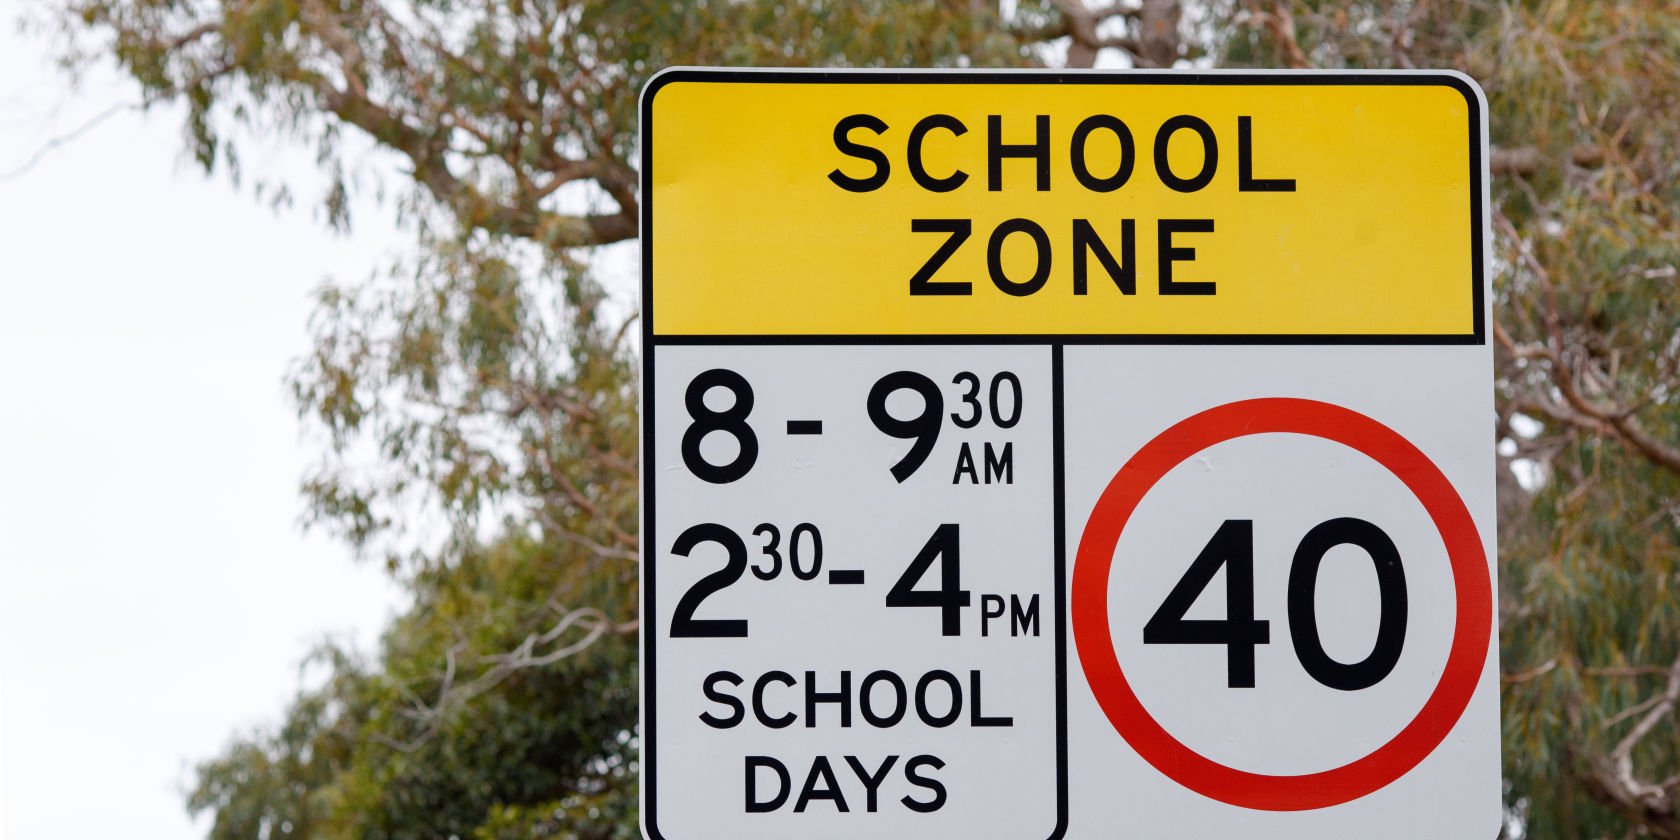 Australian drivers urged to “pay attention” as school resumes this week